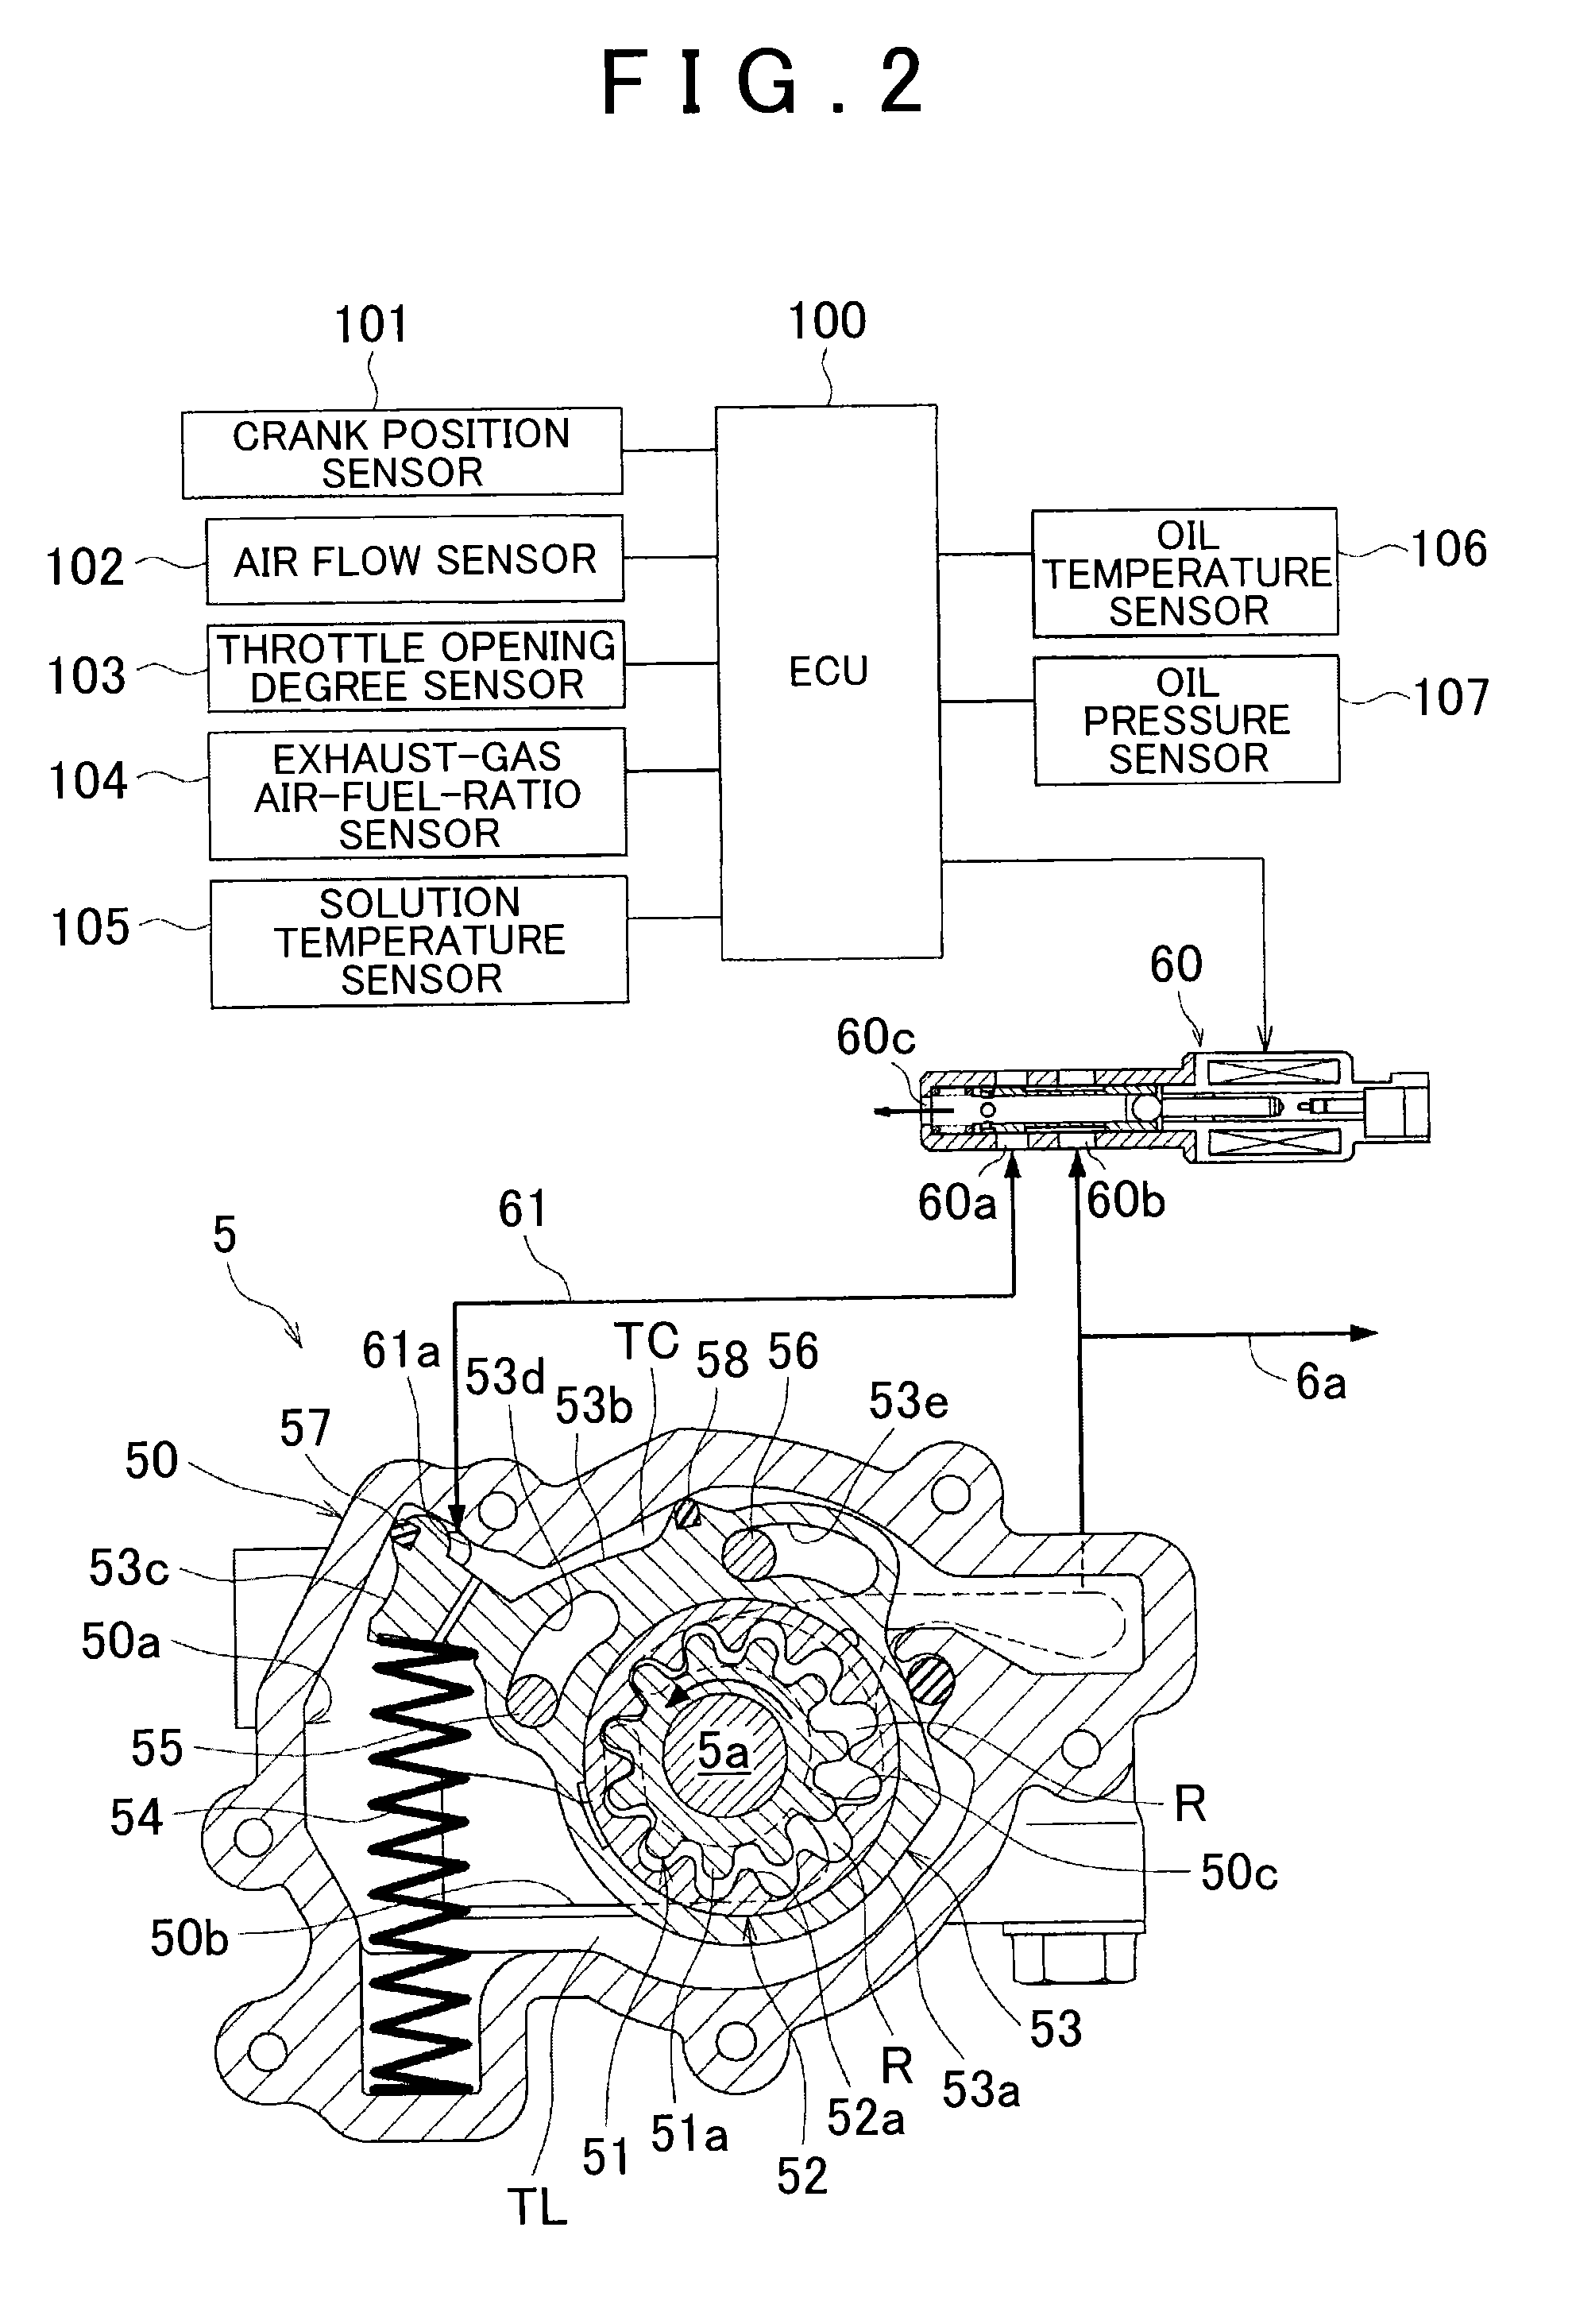 Control device for oil pump